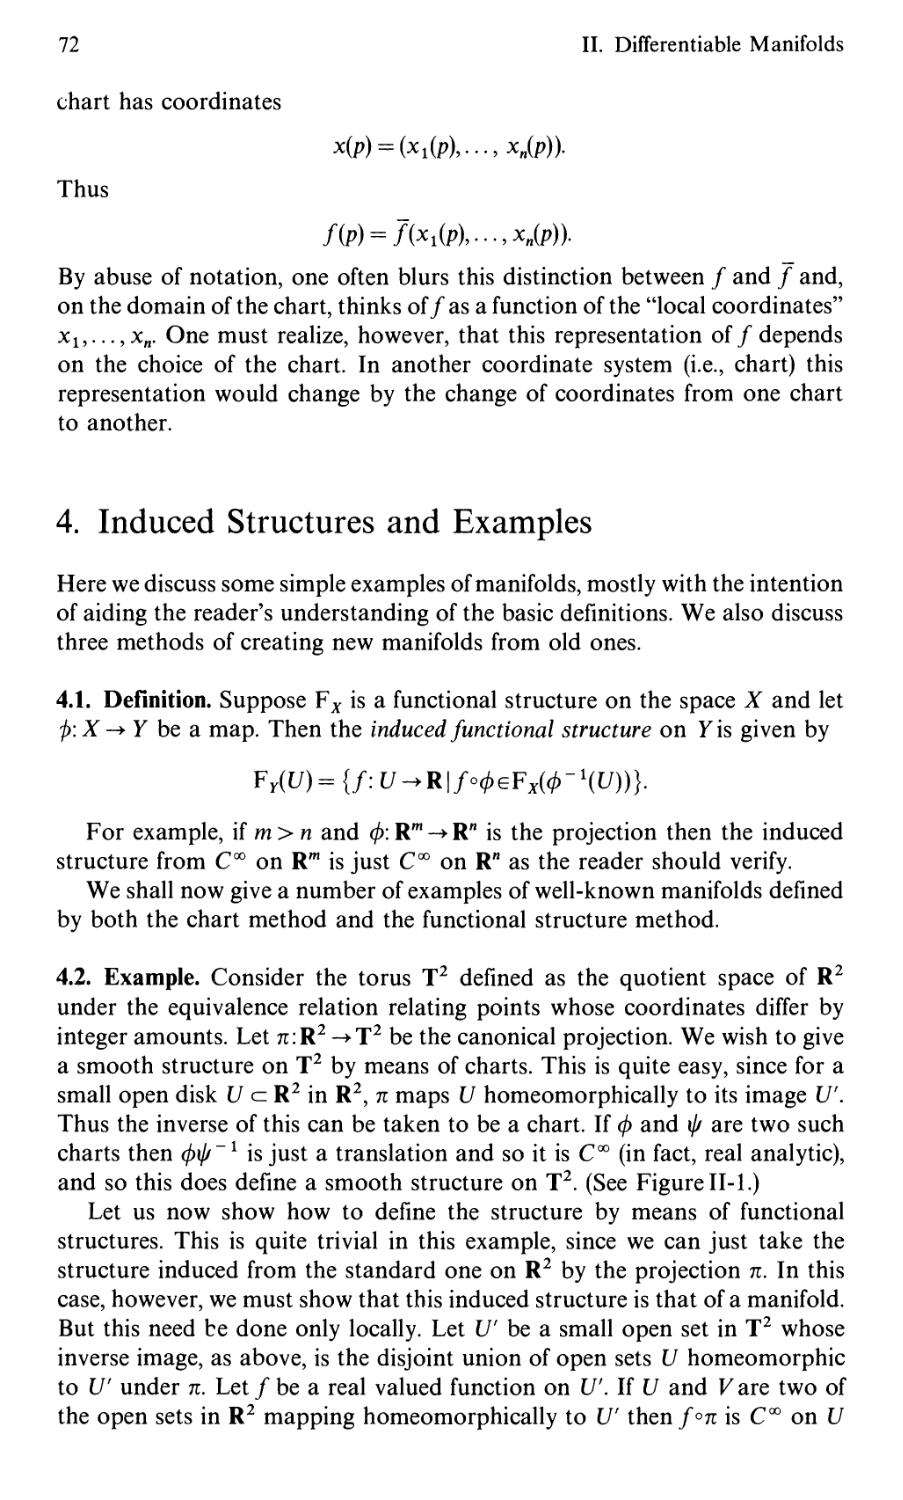 4. Induced Structures and Examples